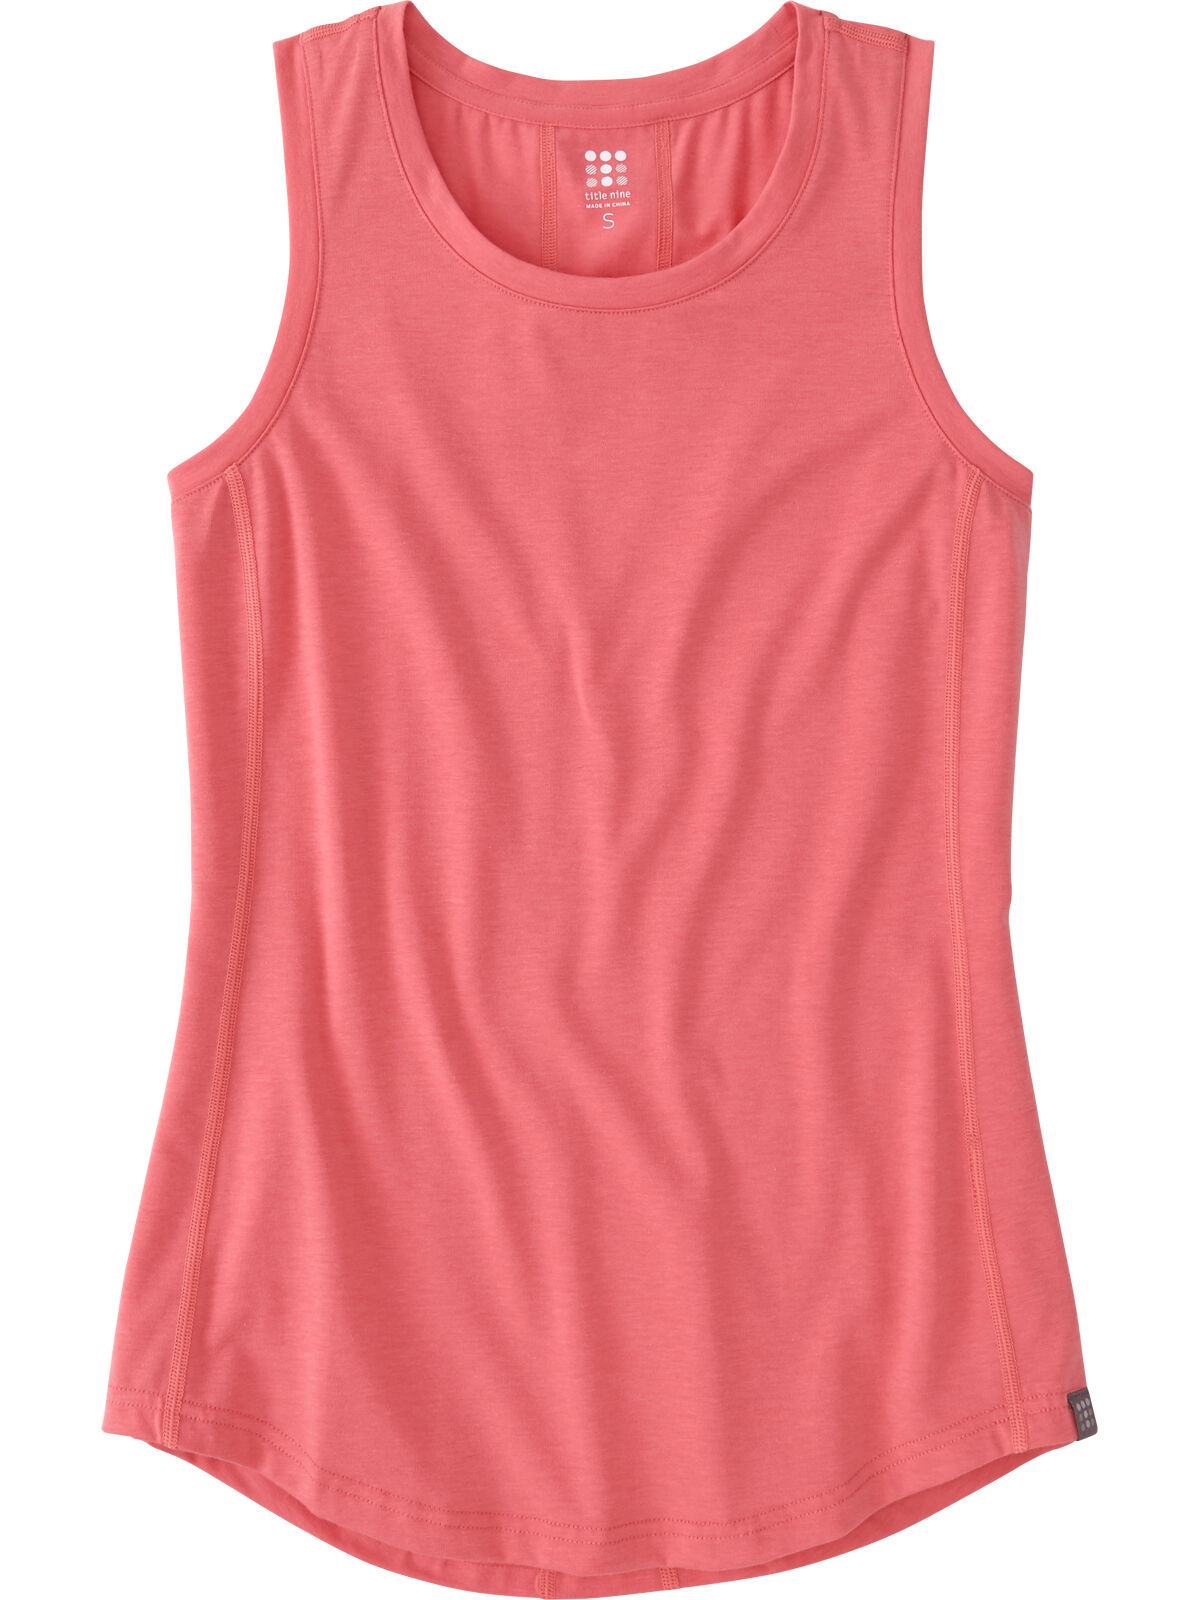 Vibe Tank Top - Solid